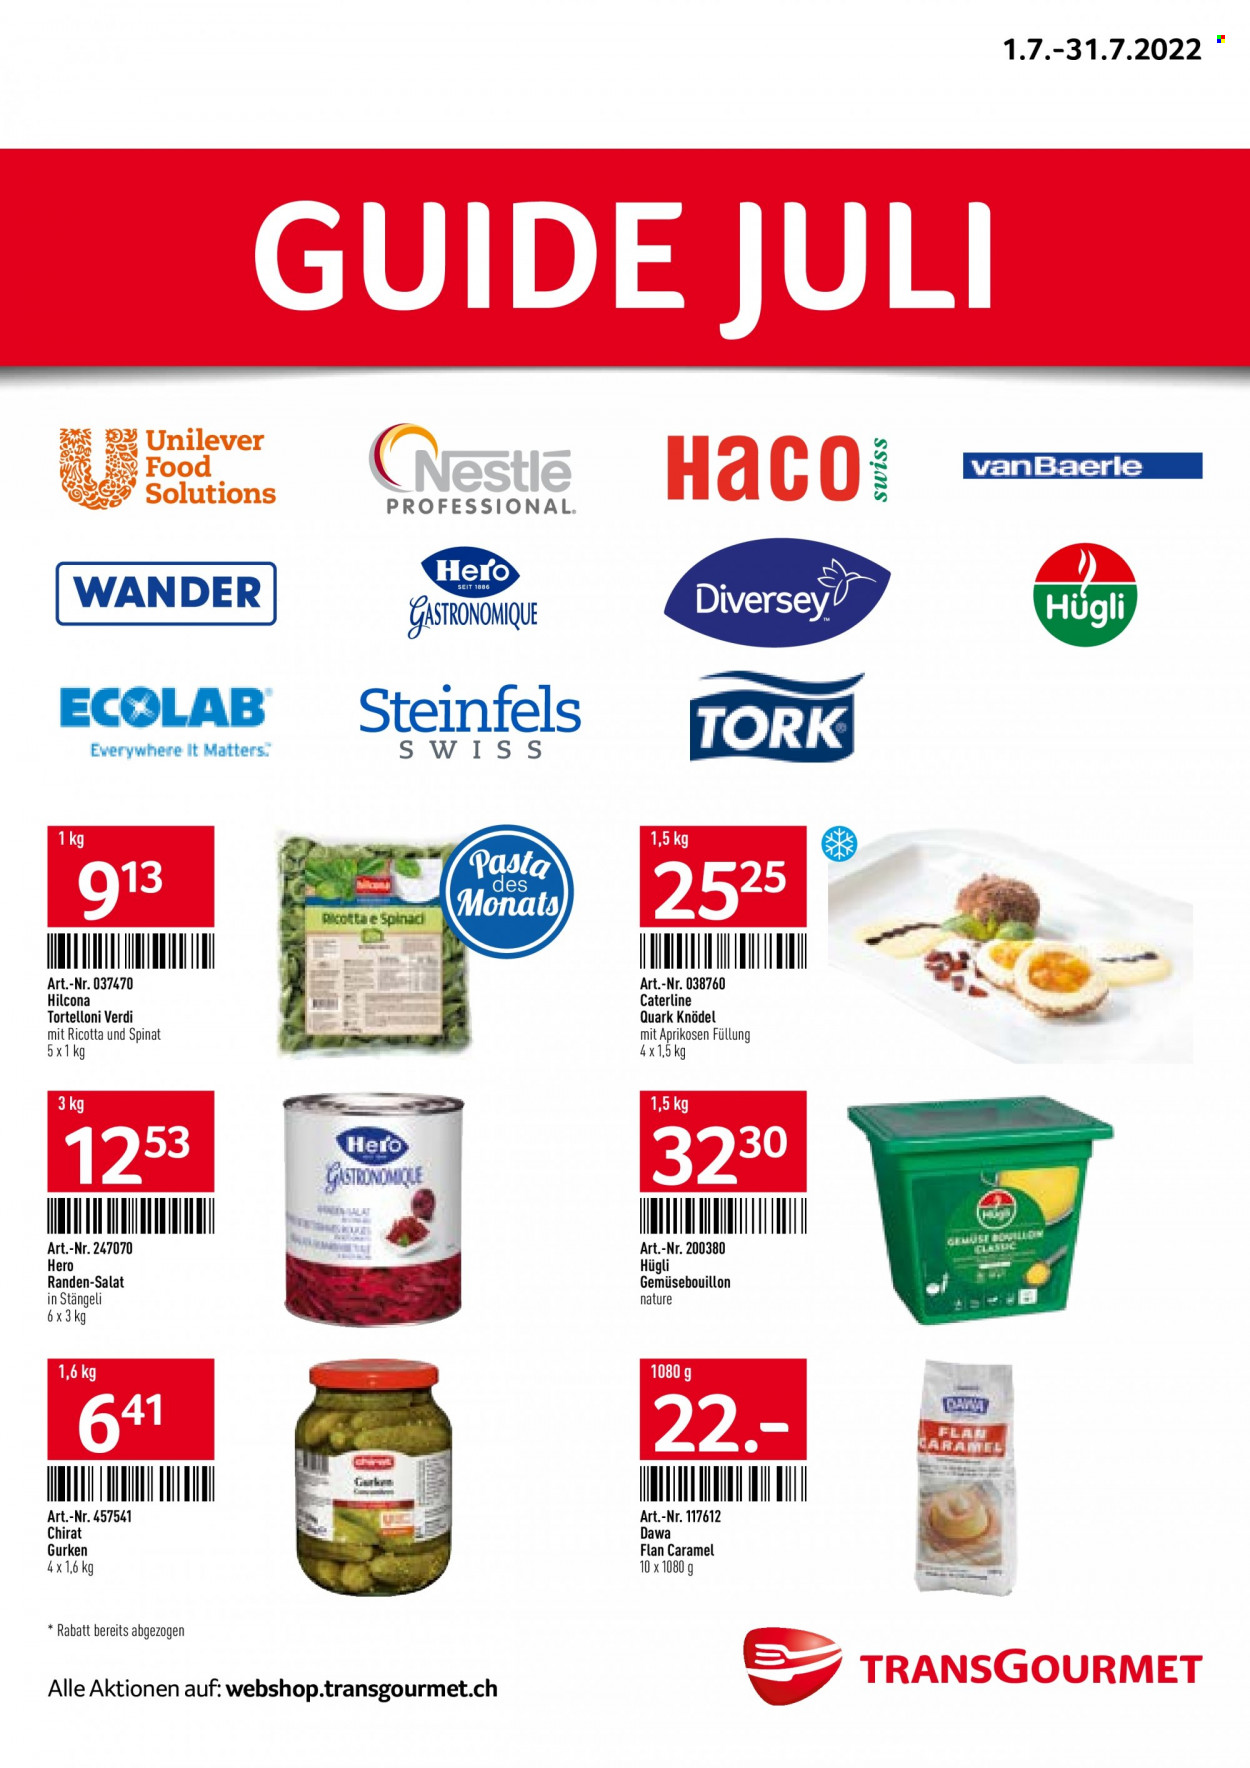 Catalogue TransGourmet - 1.7.2022 - 31.7.2022. Page 1.